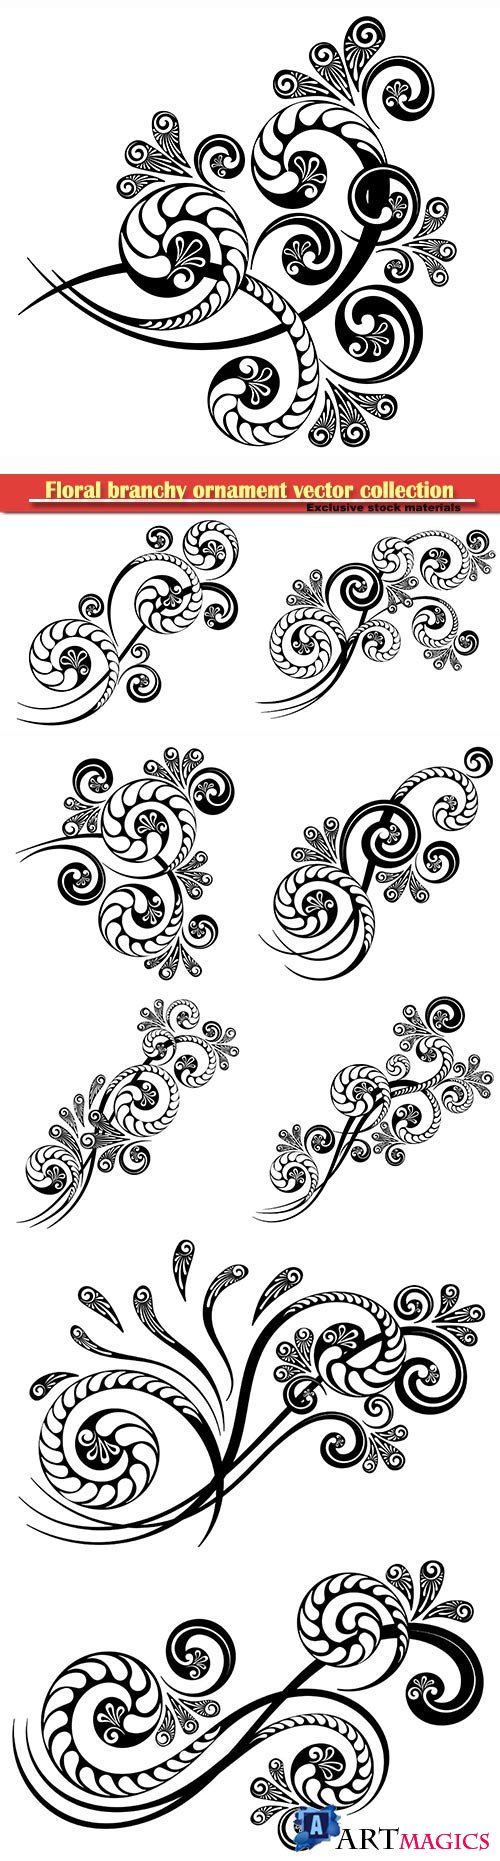 Floral branchy ornament with a beautiful complex pattern for decorative design of invitations, letters and greeting cards